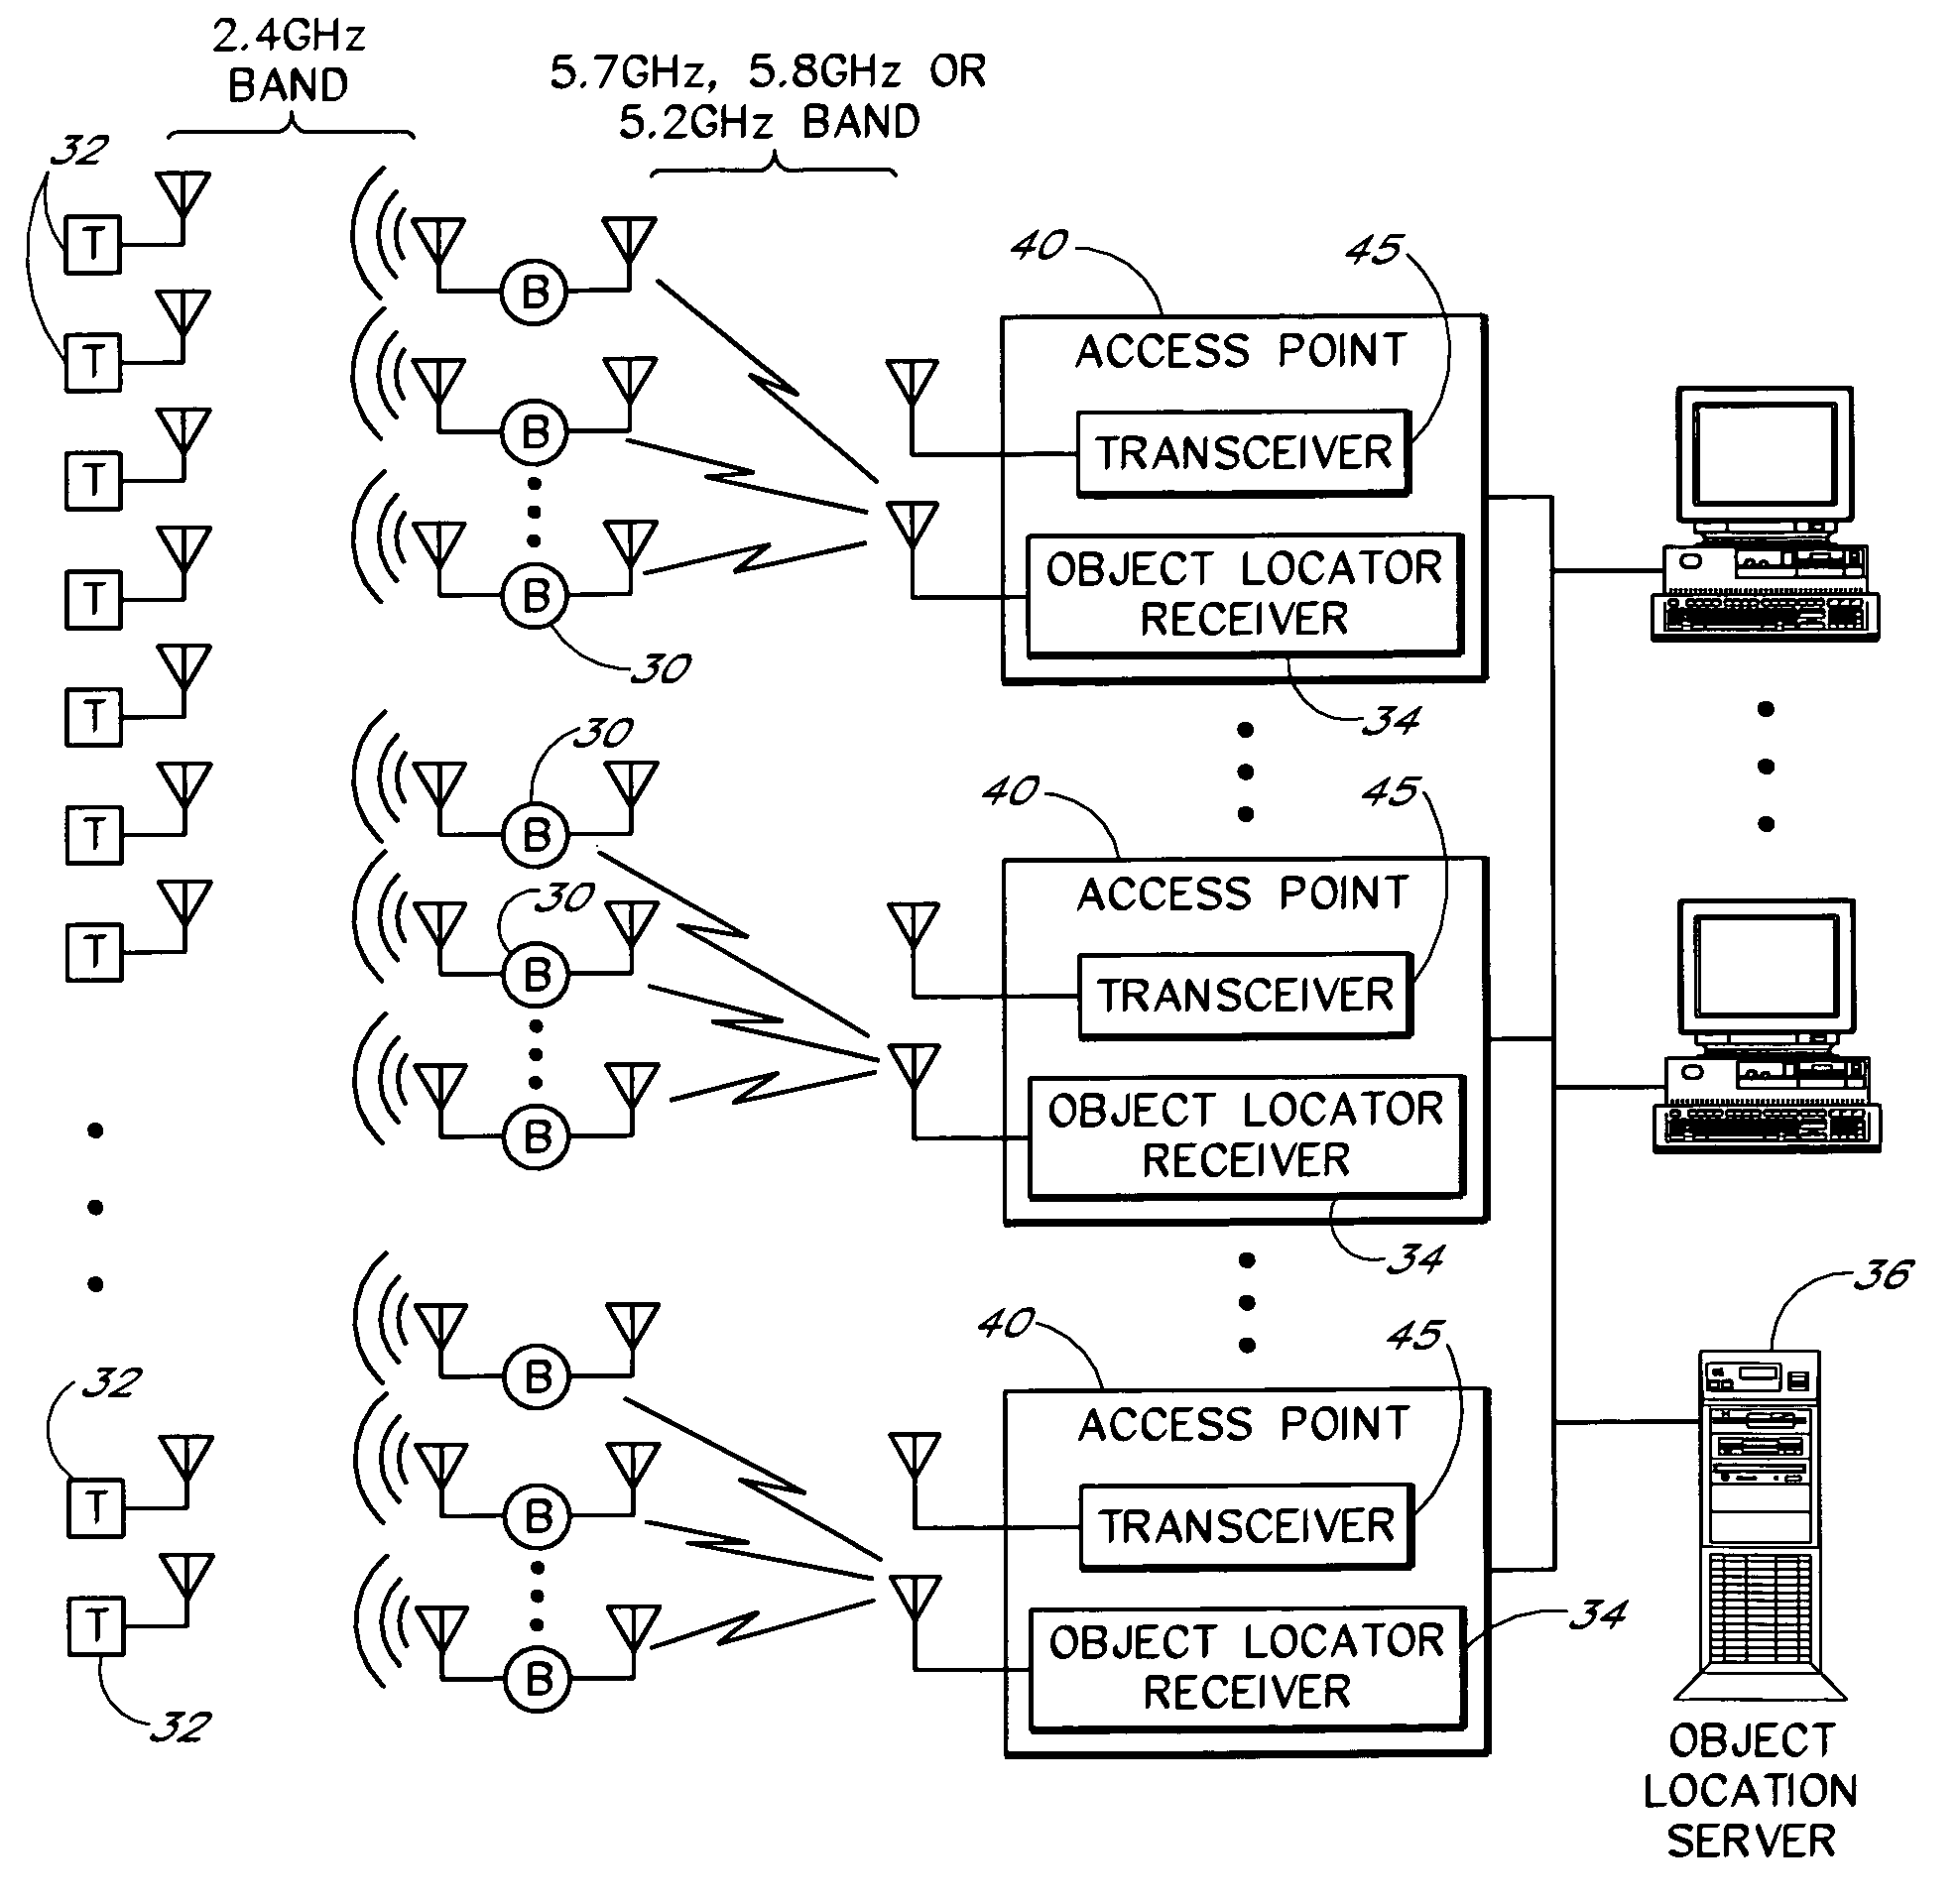 Object location monitoring system